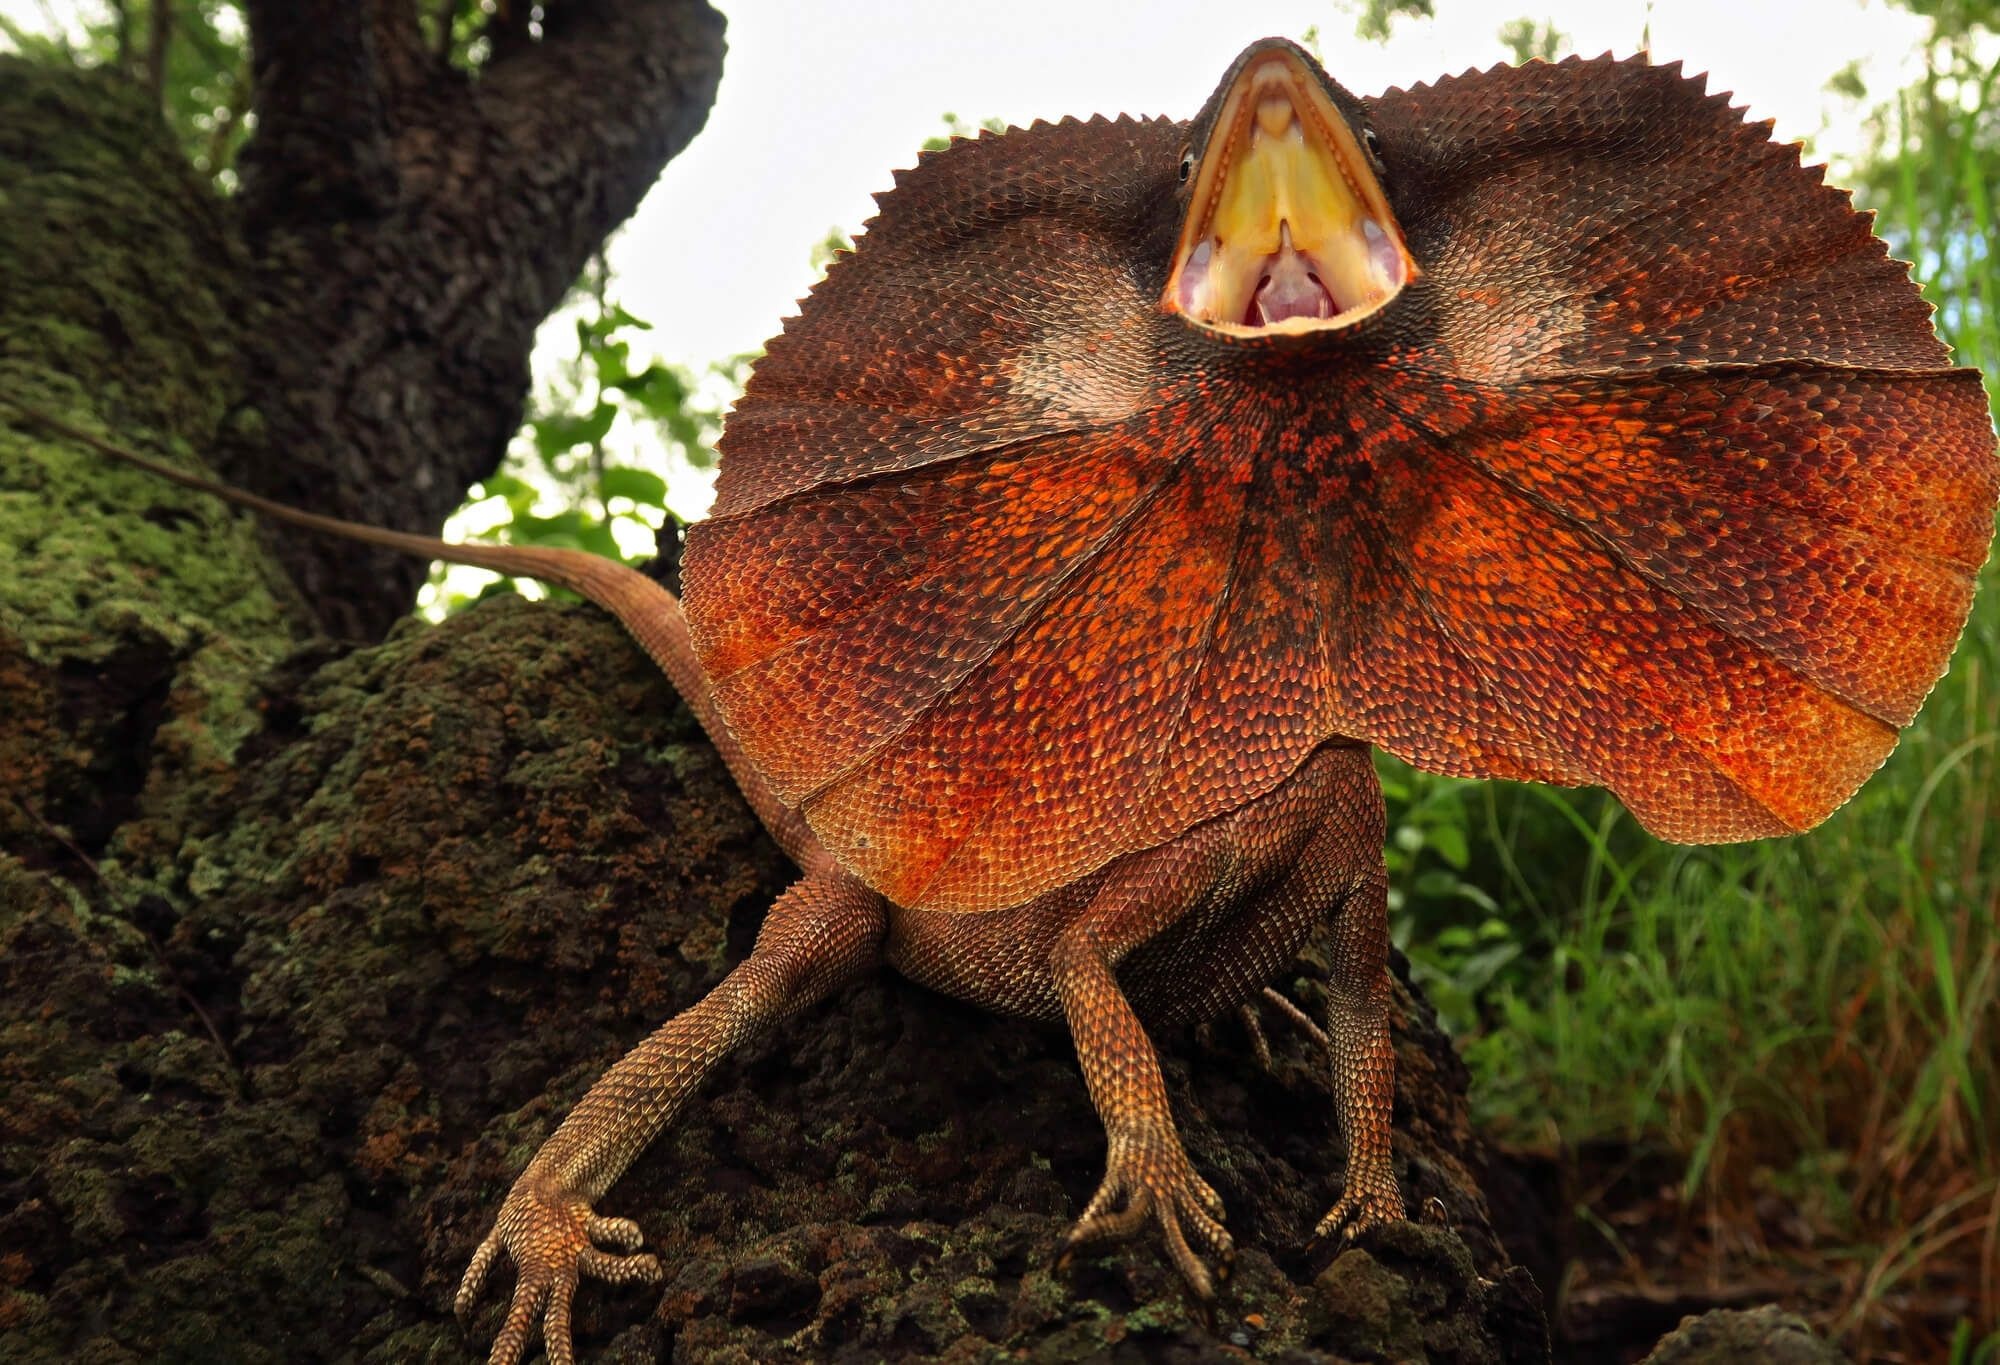 Frilled-neck lizard quirks, Cute reptile facts, Earth's reptilian wonders, Playful personalities, 2000x1370 HD Desktop